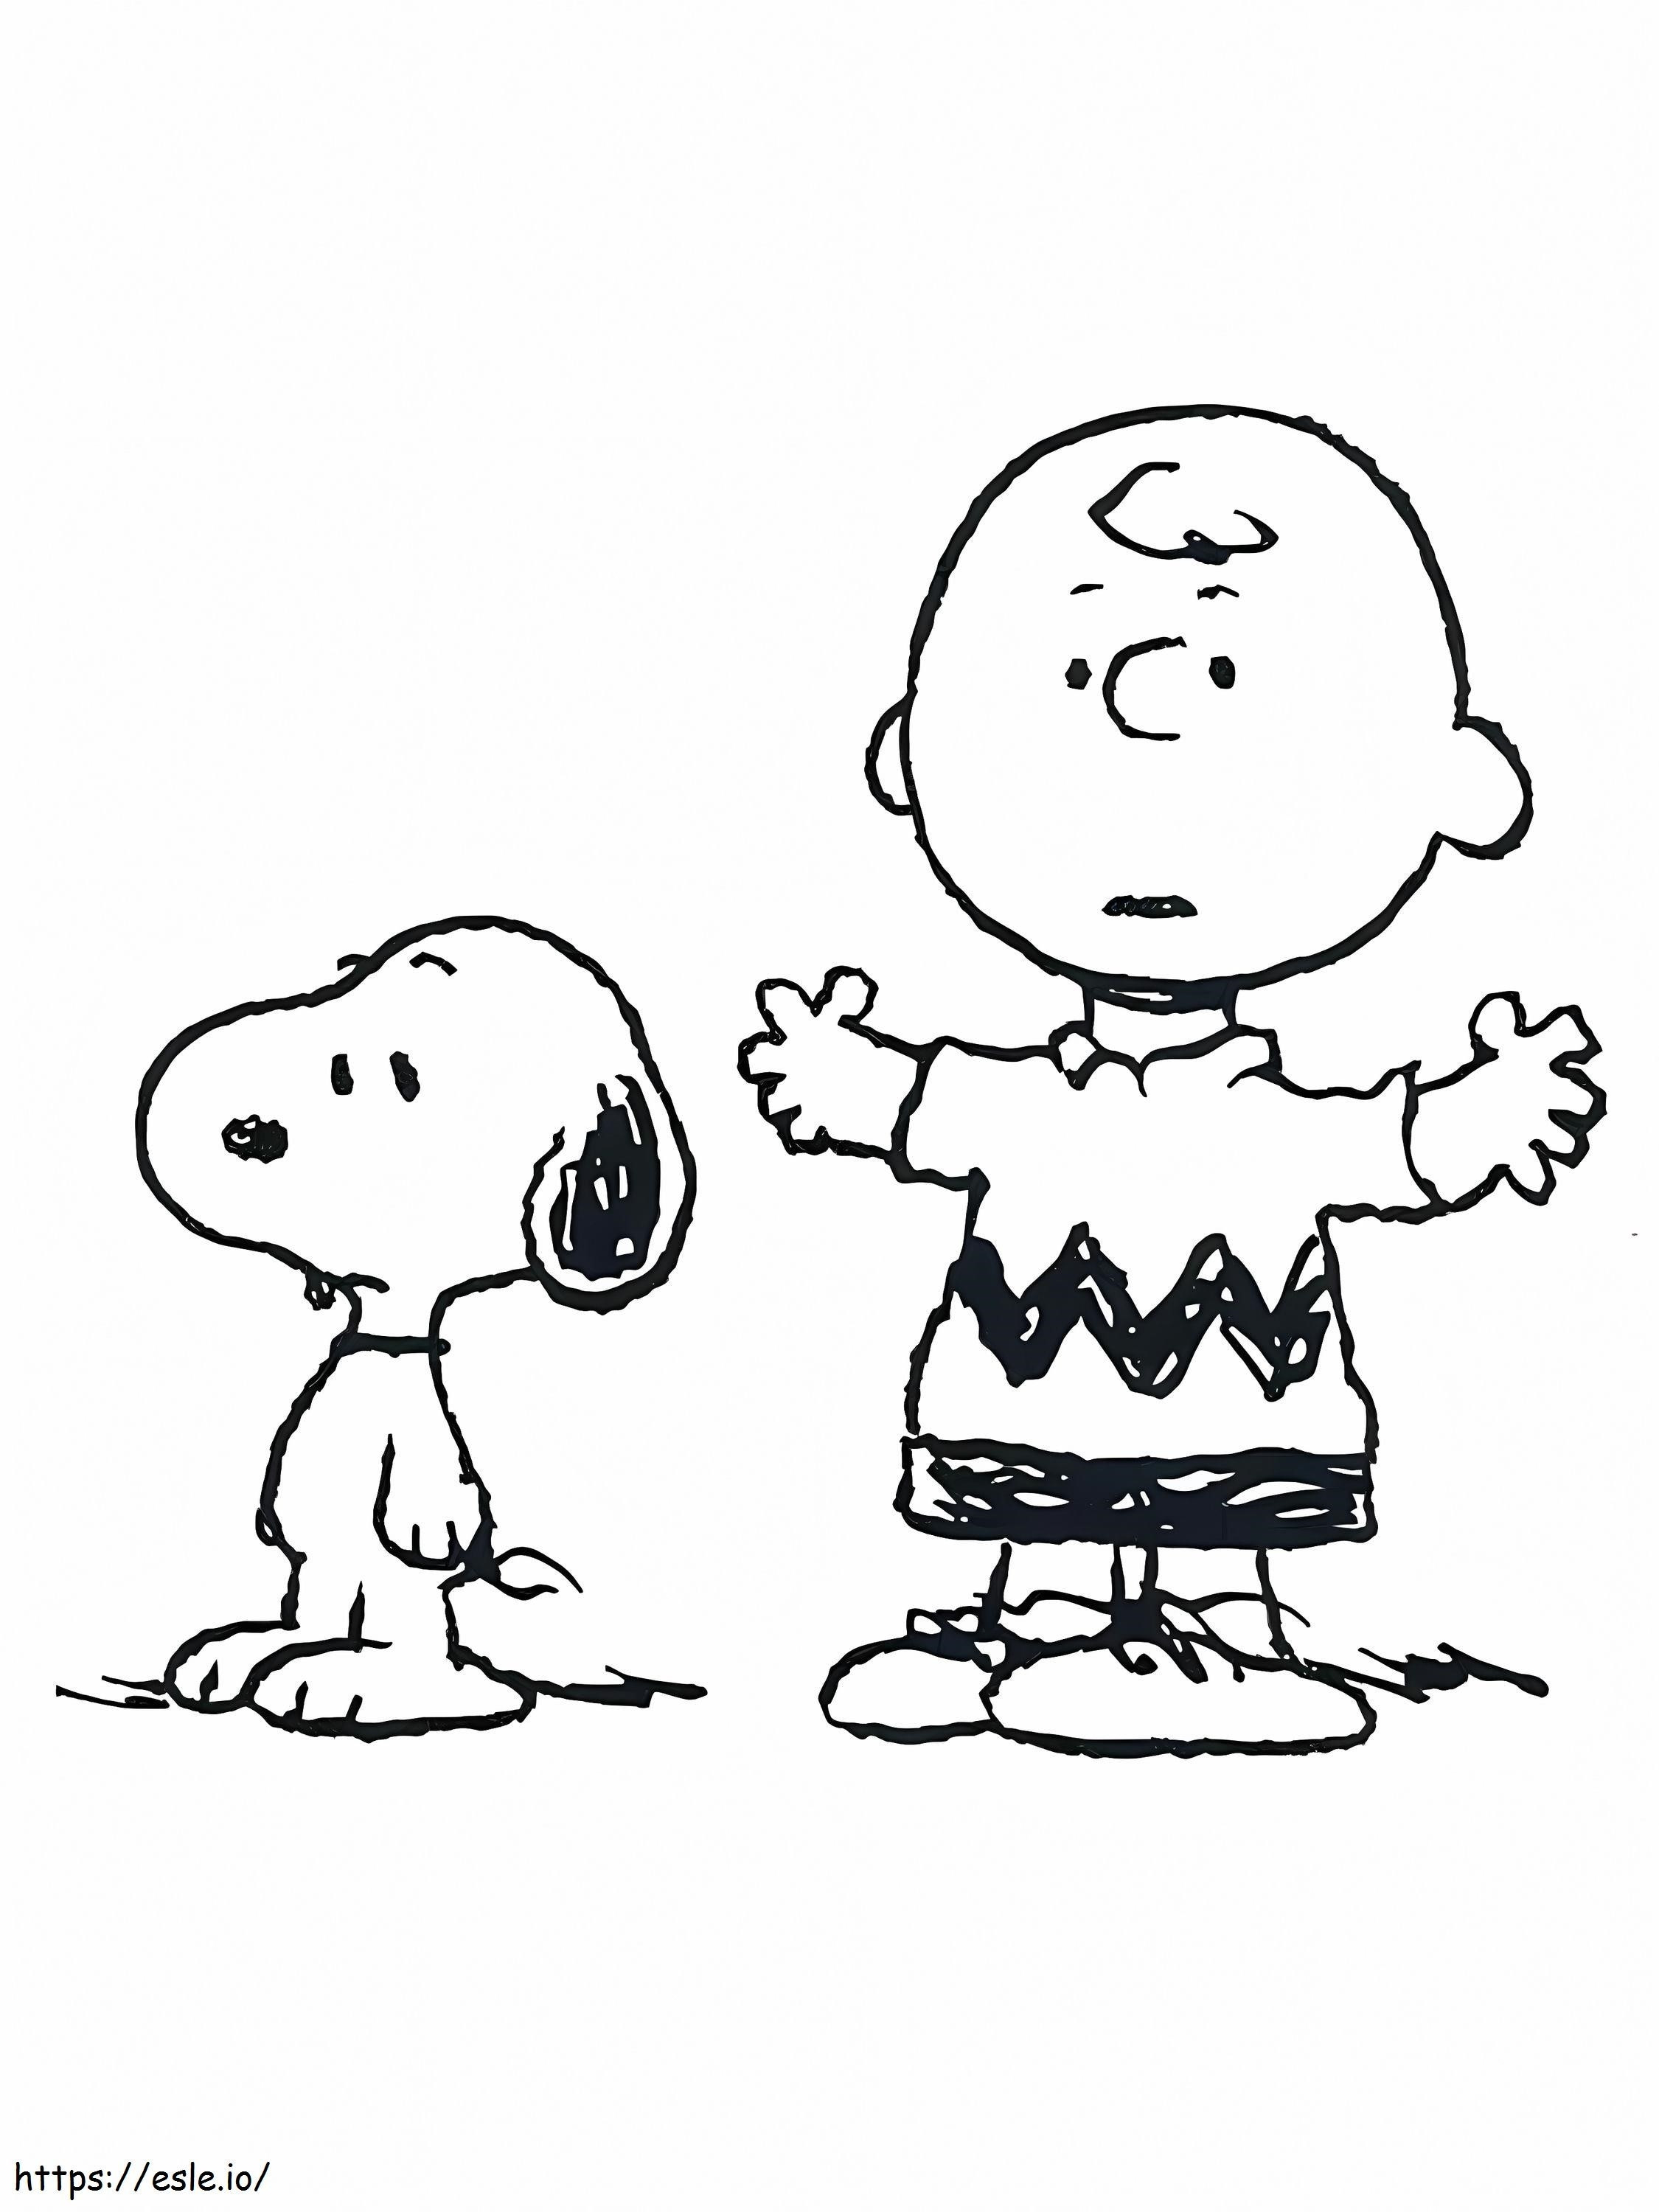 Snoopy And Charlie Brown coloring page